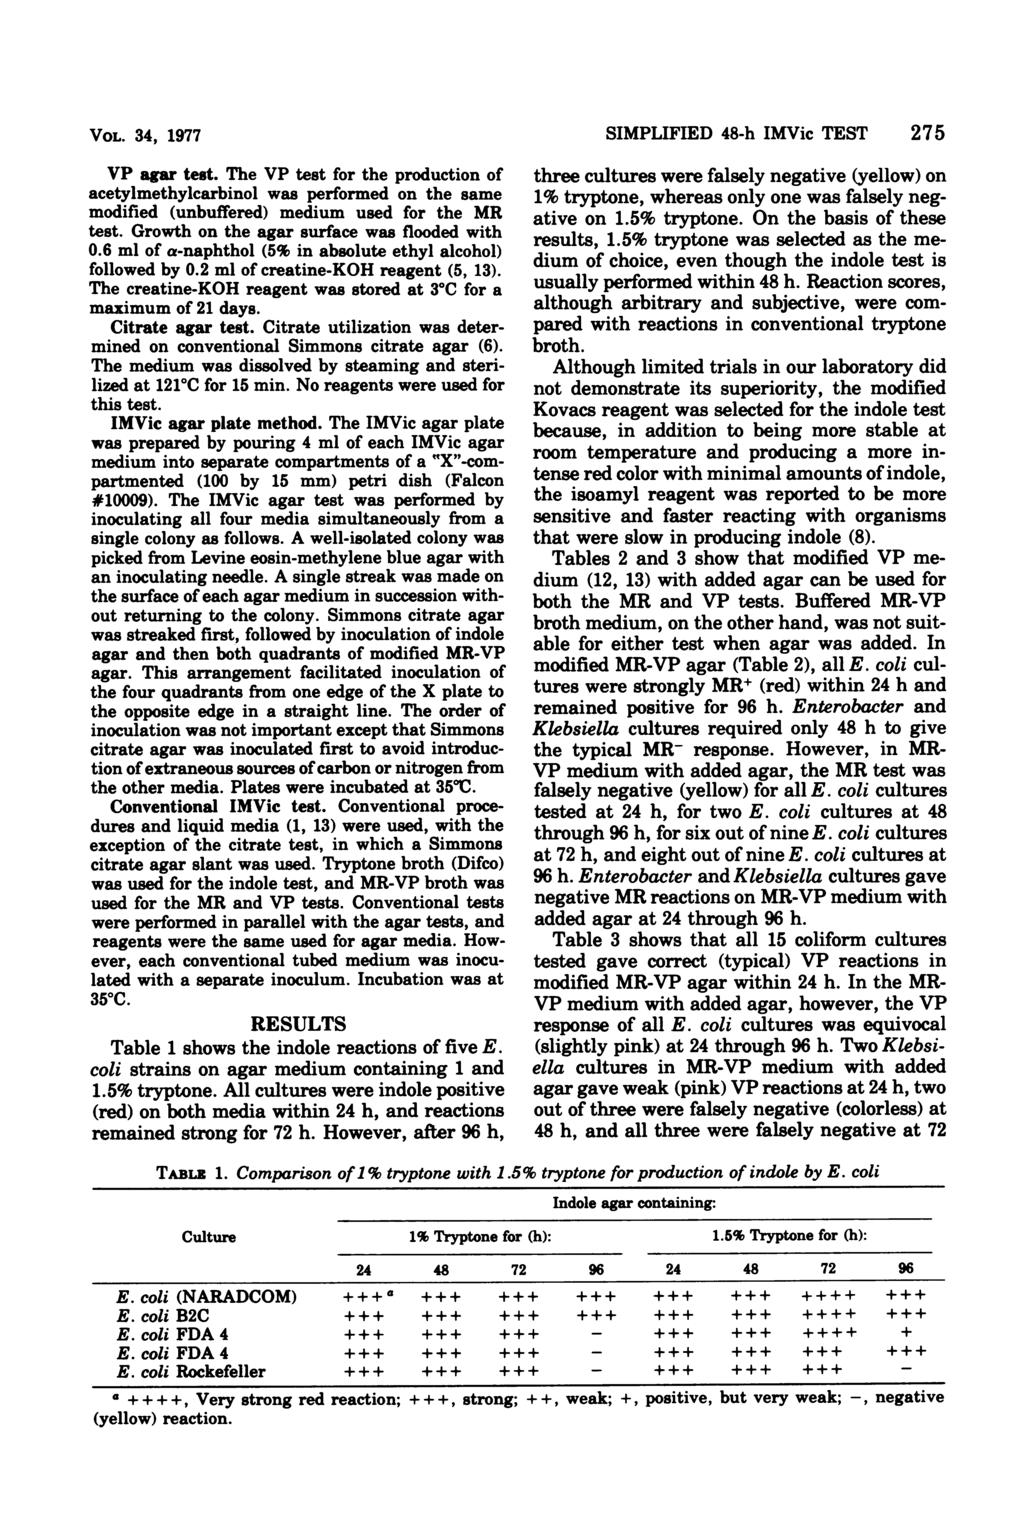 VOL. 34, 1977 VP agar test. The VP test for the production of acetylmethylcarbinol was performed on the same modified (unbuffered) medium used for the MR test.